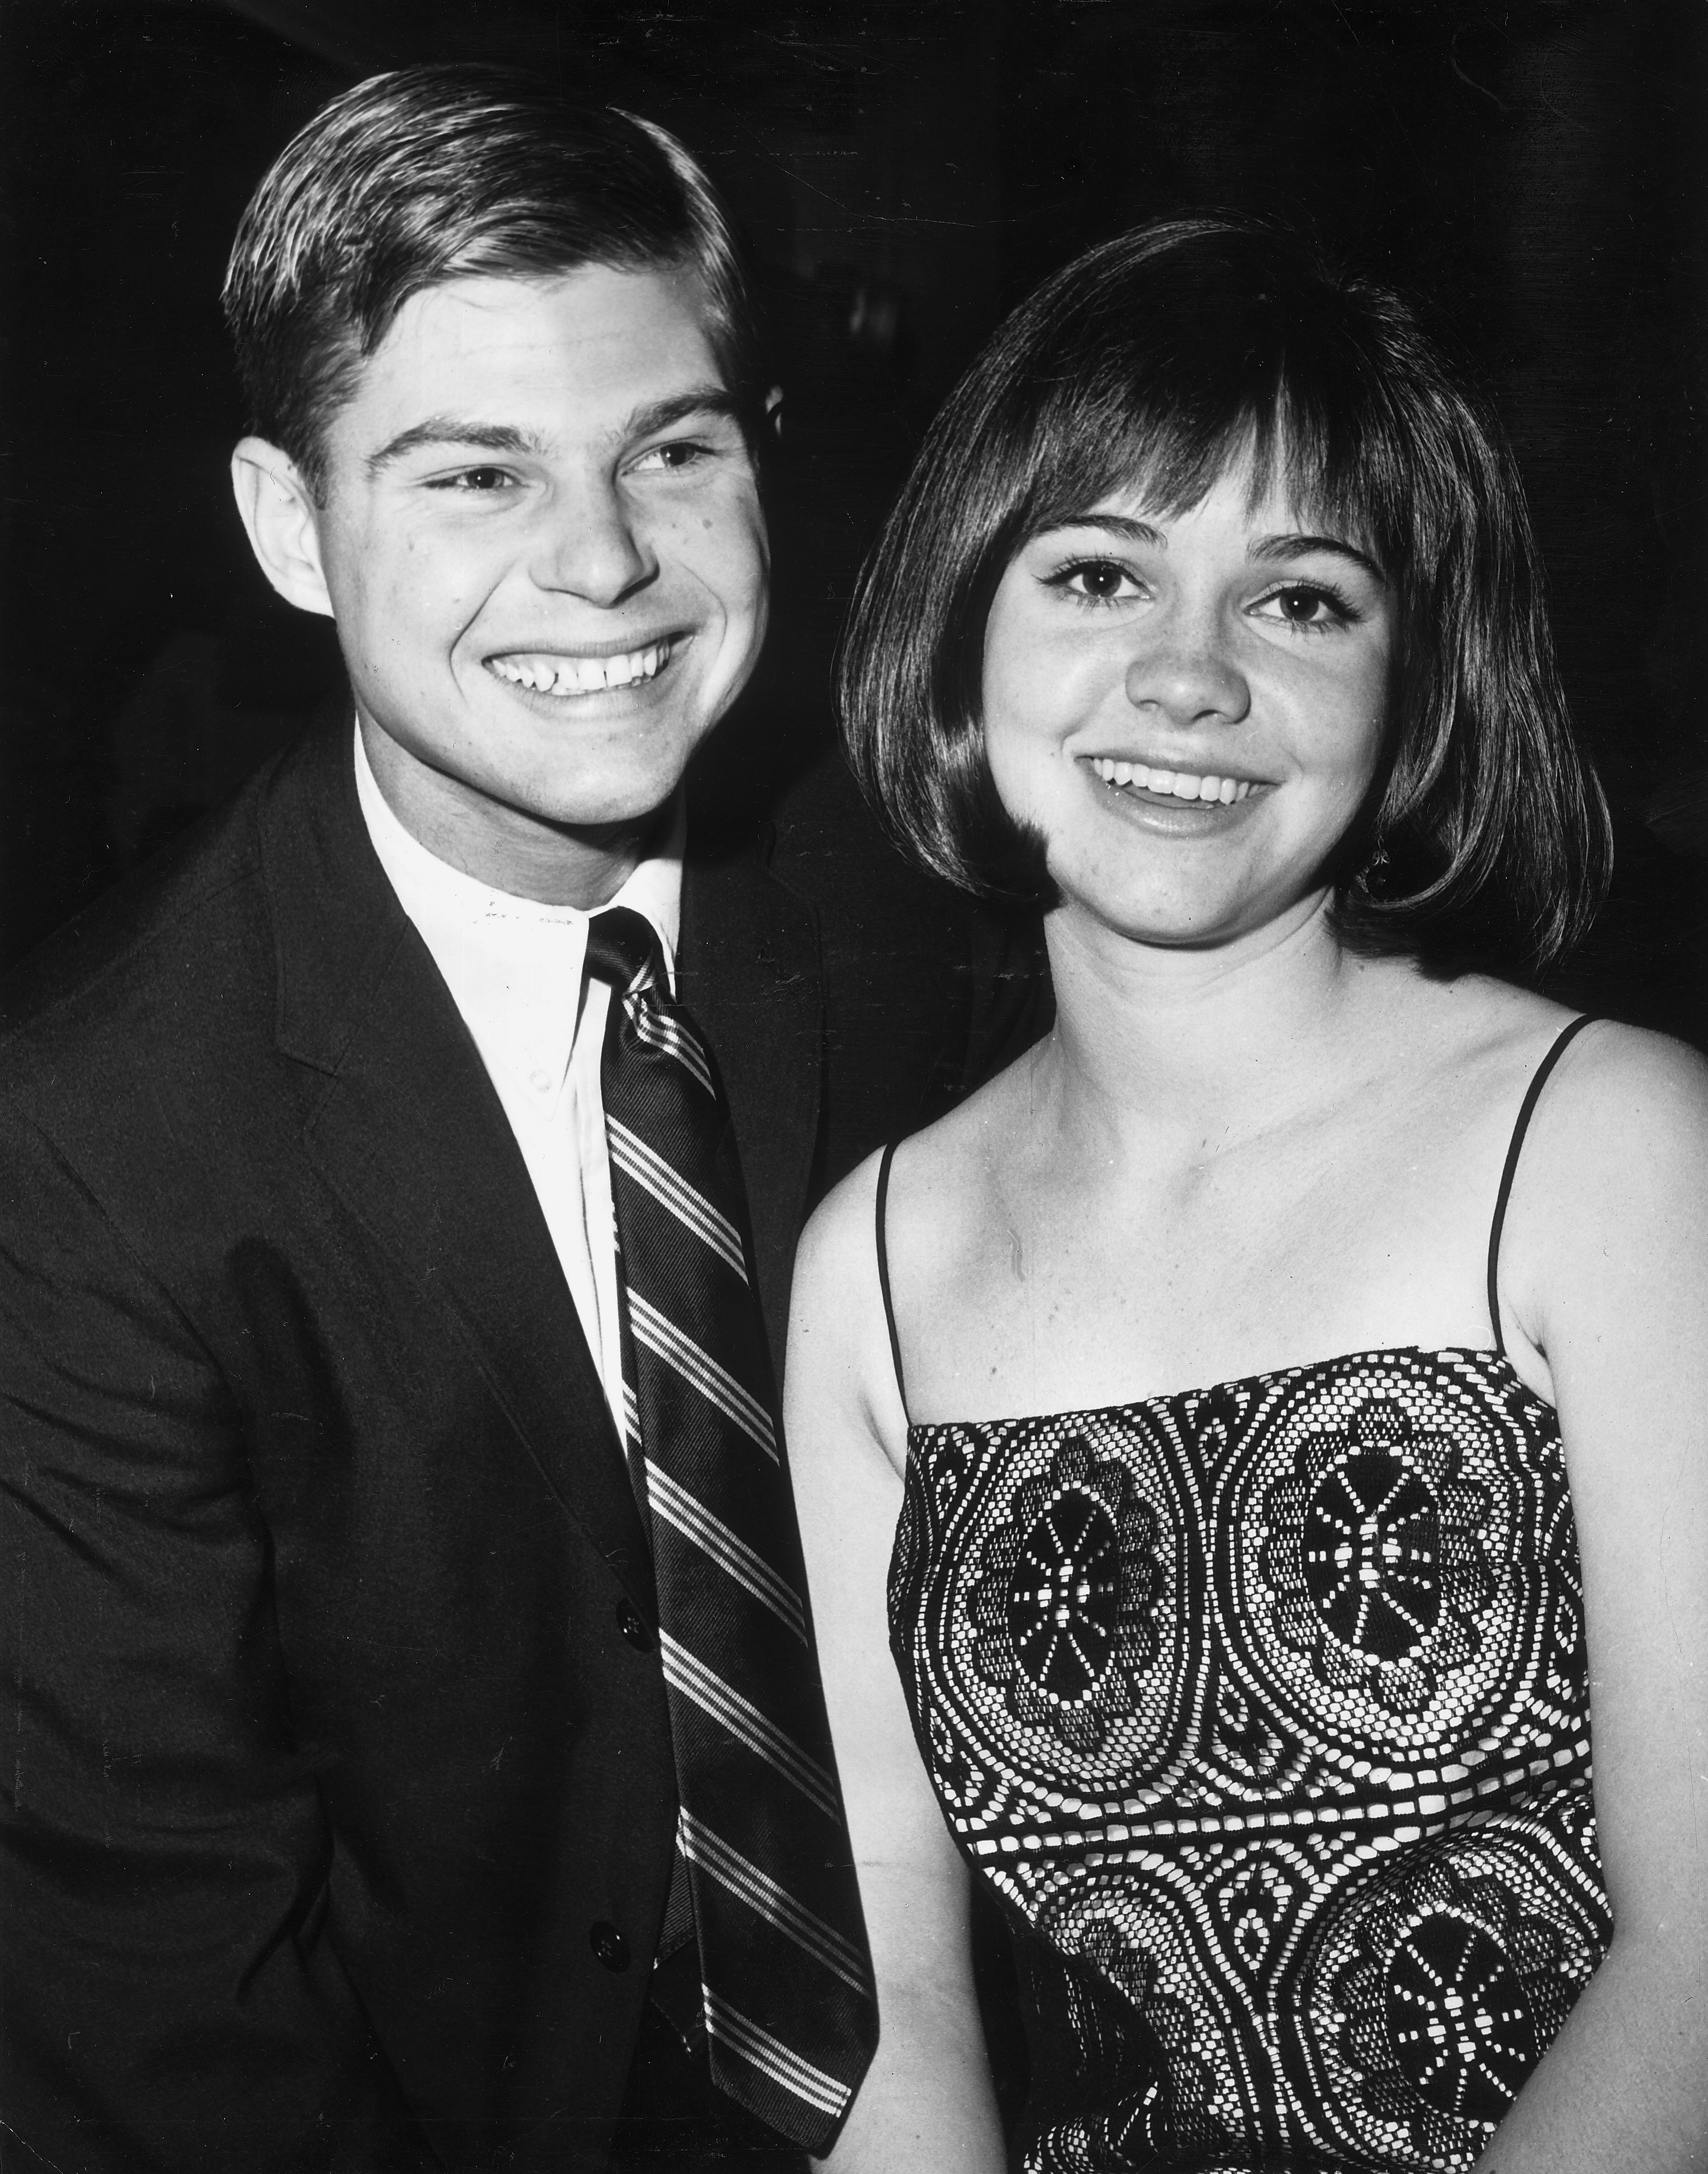 A portrait of Steven Craig and Sally Field, 1965 | Source: Getty Images